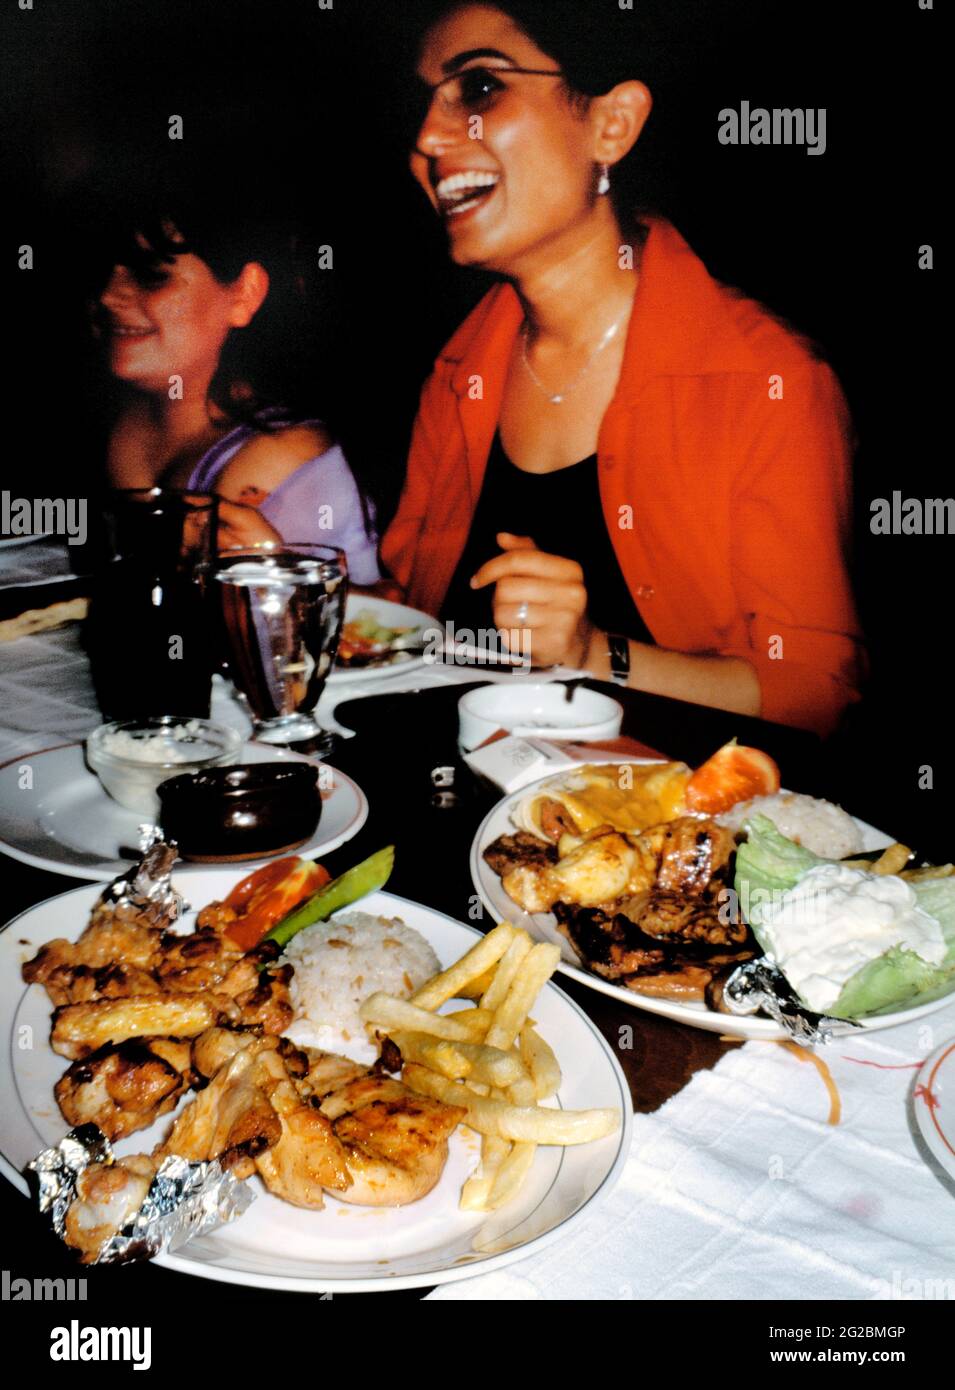 Istanbul Turkey Dinner Party Turkish Woman Laughing Stock Photo